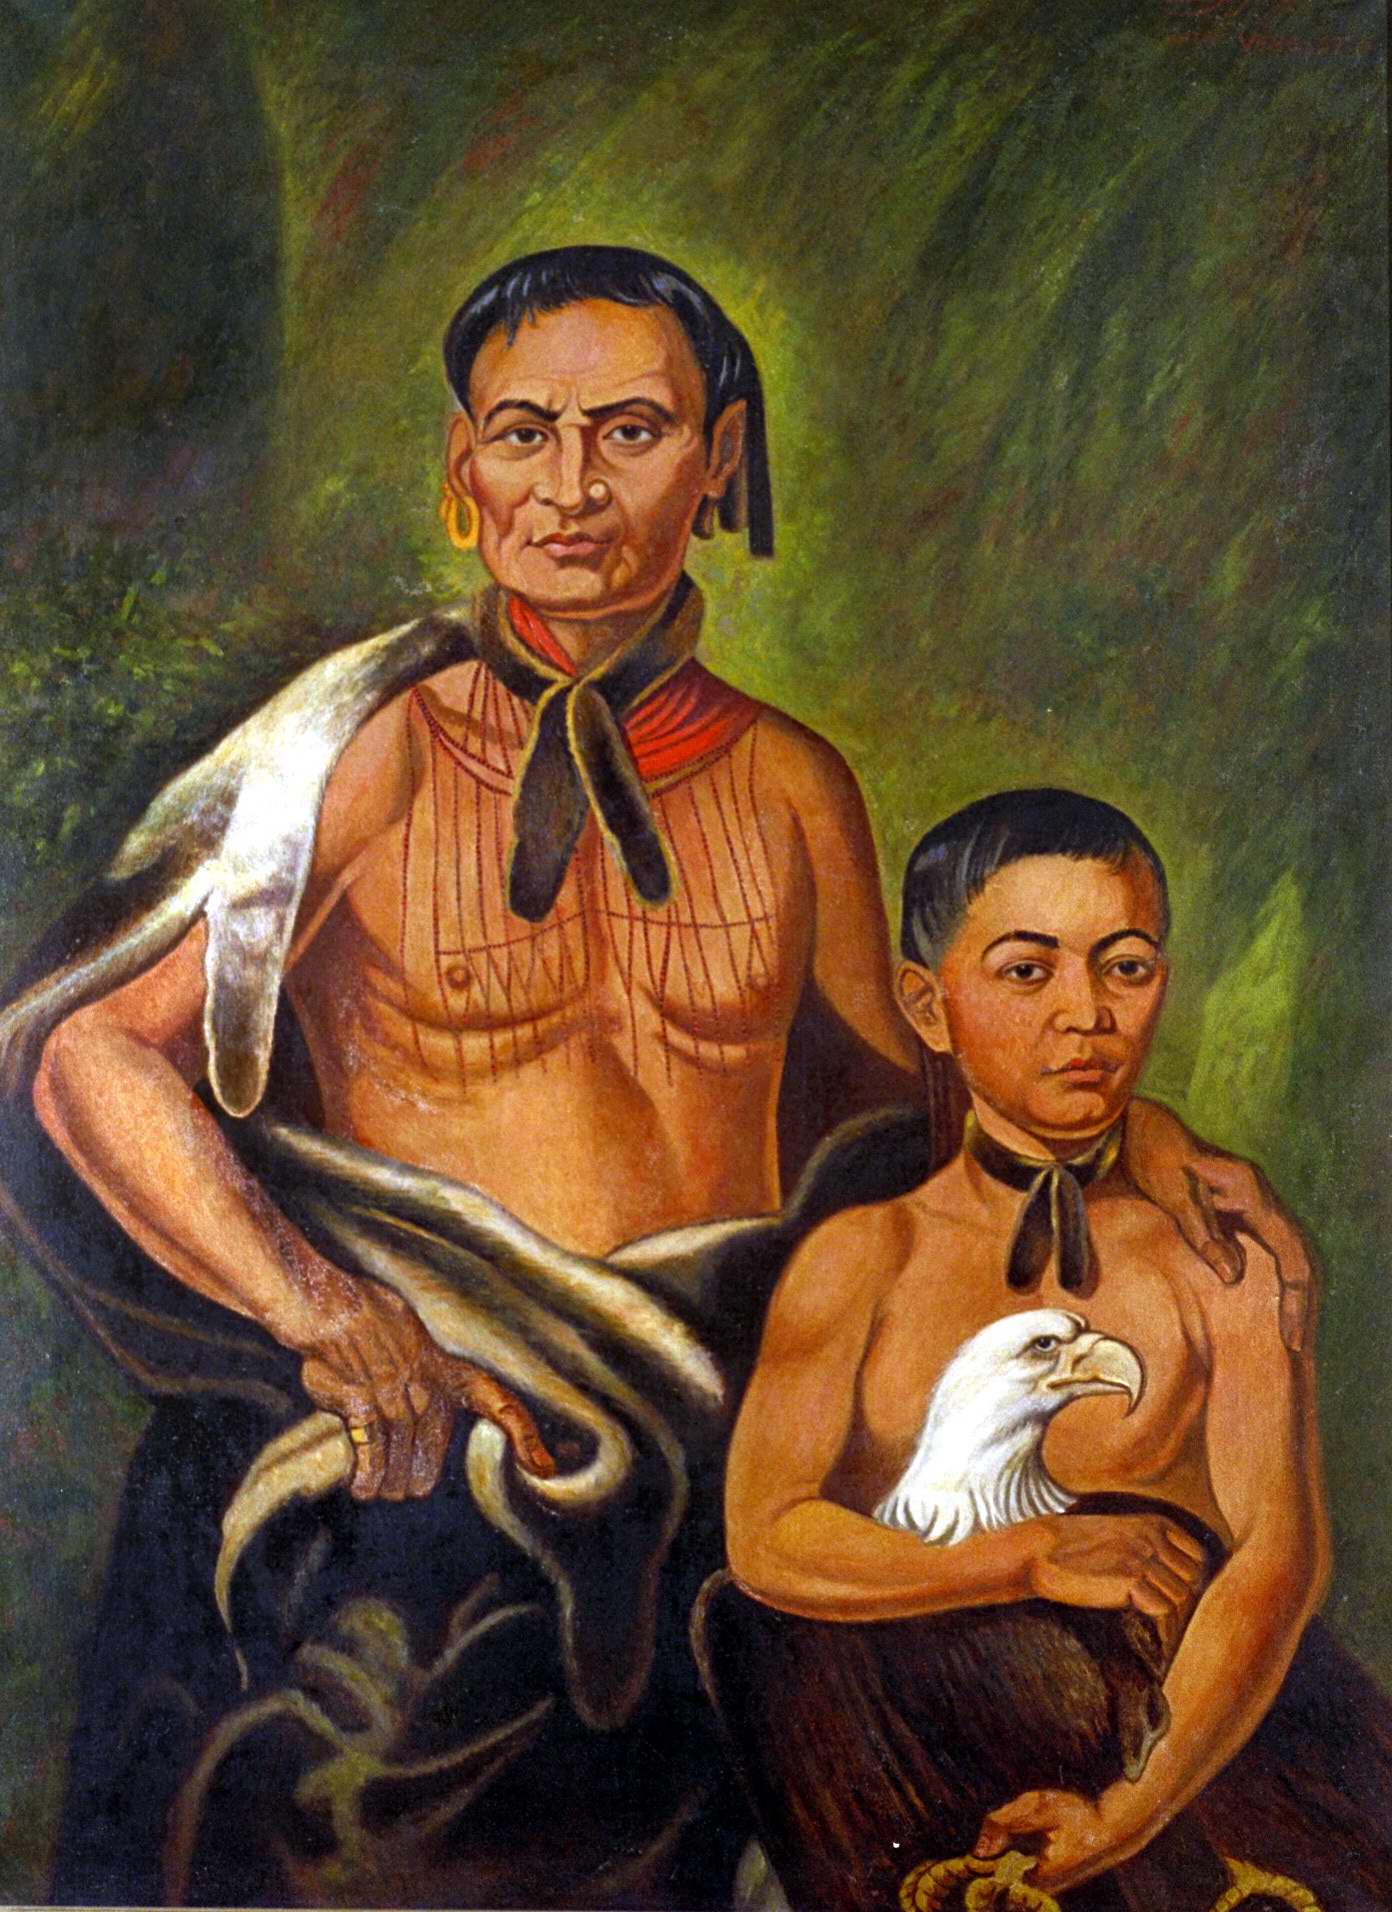 painting of native man and boy